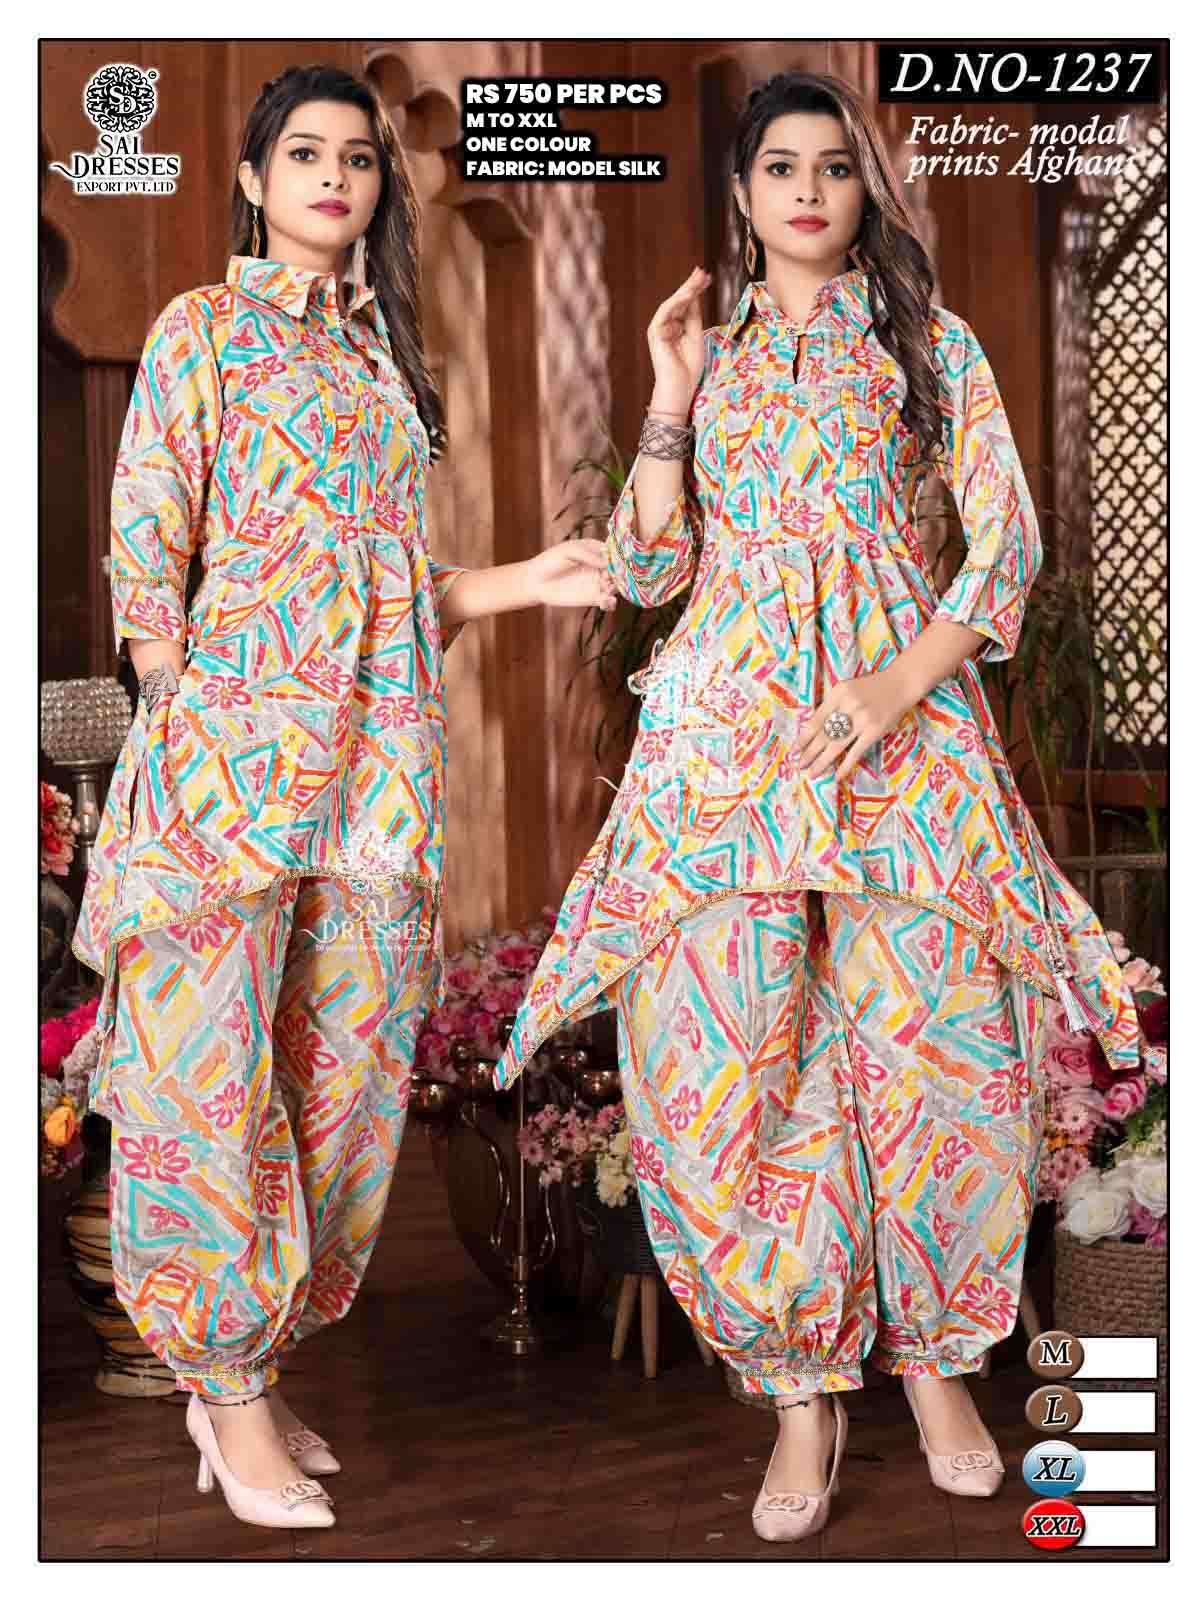 SAI DRESSES PRESENT D.NO 1237 READY TO FANCY WEAR AFGHANI PANT STYLE CO-ORD SET COMBO COLLECTION IN WHOLESALE RATE IN SURAT